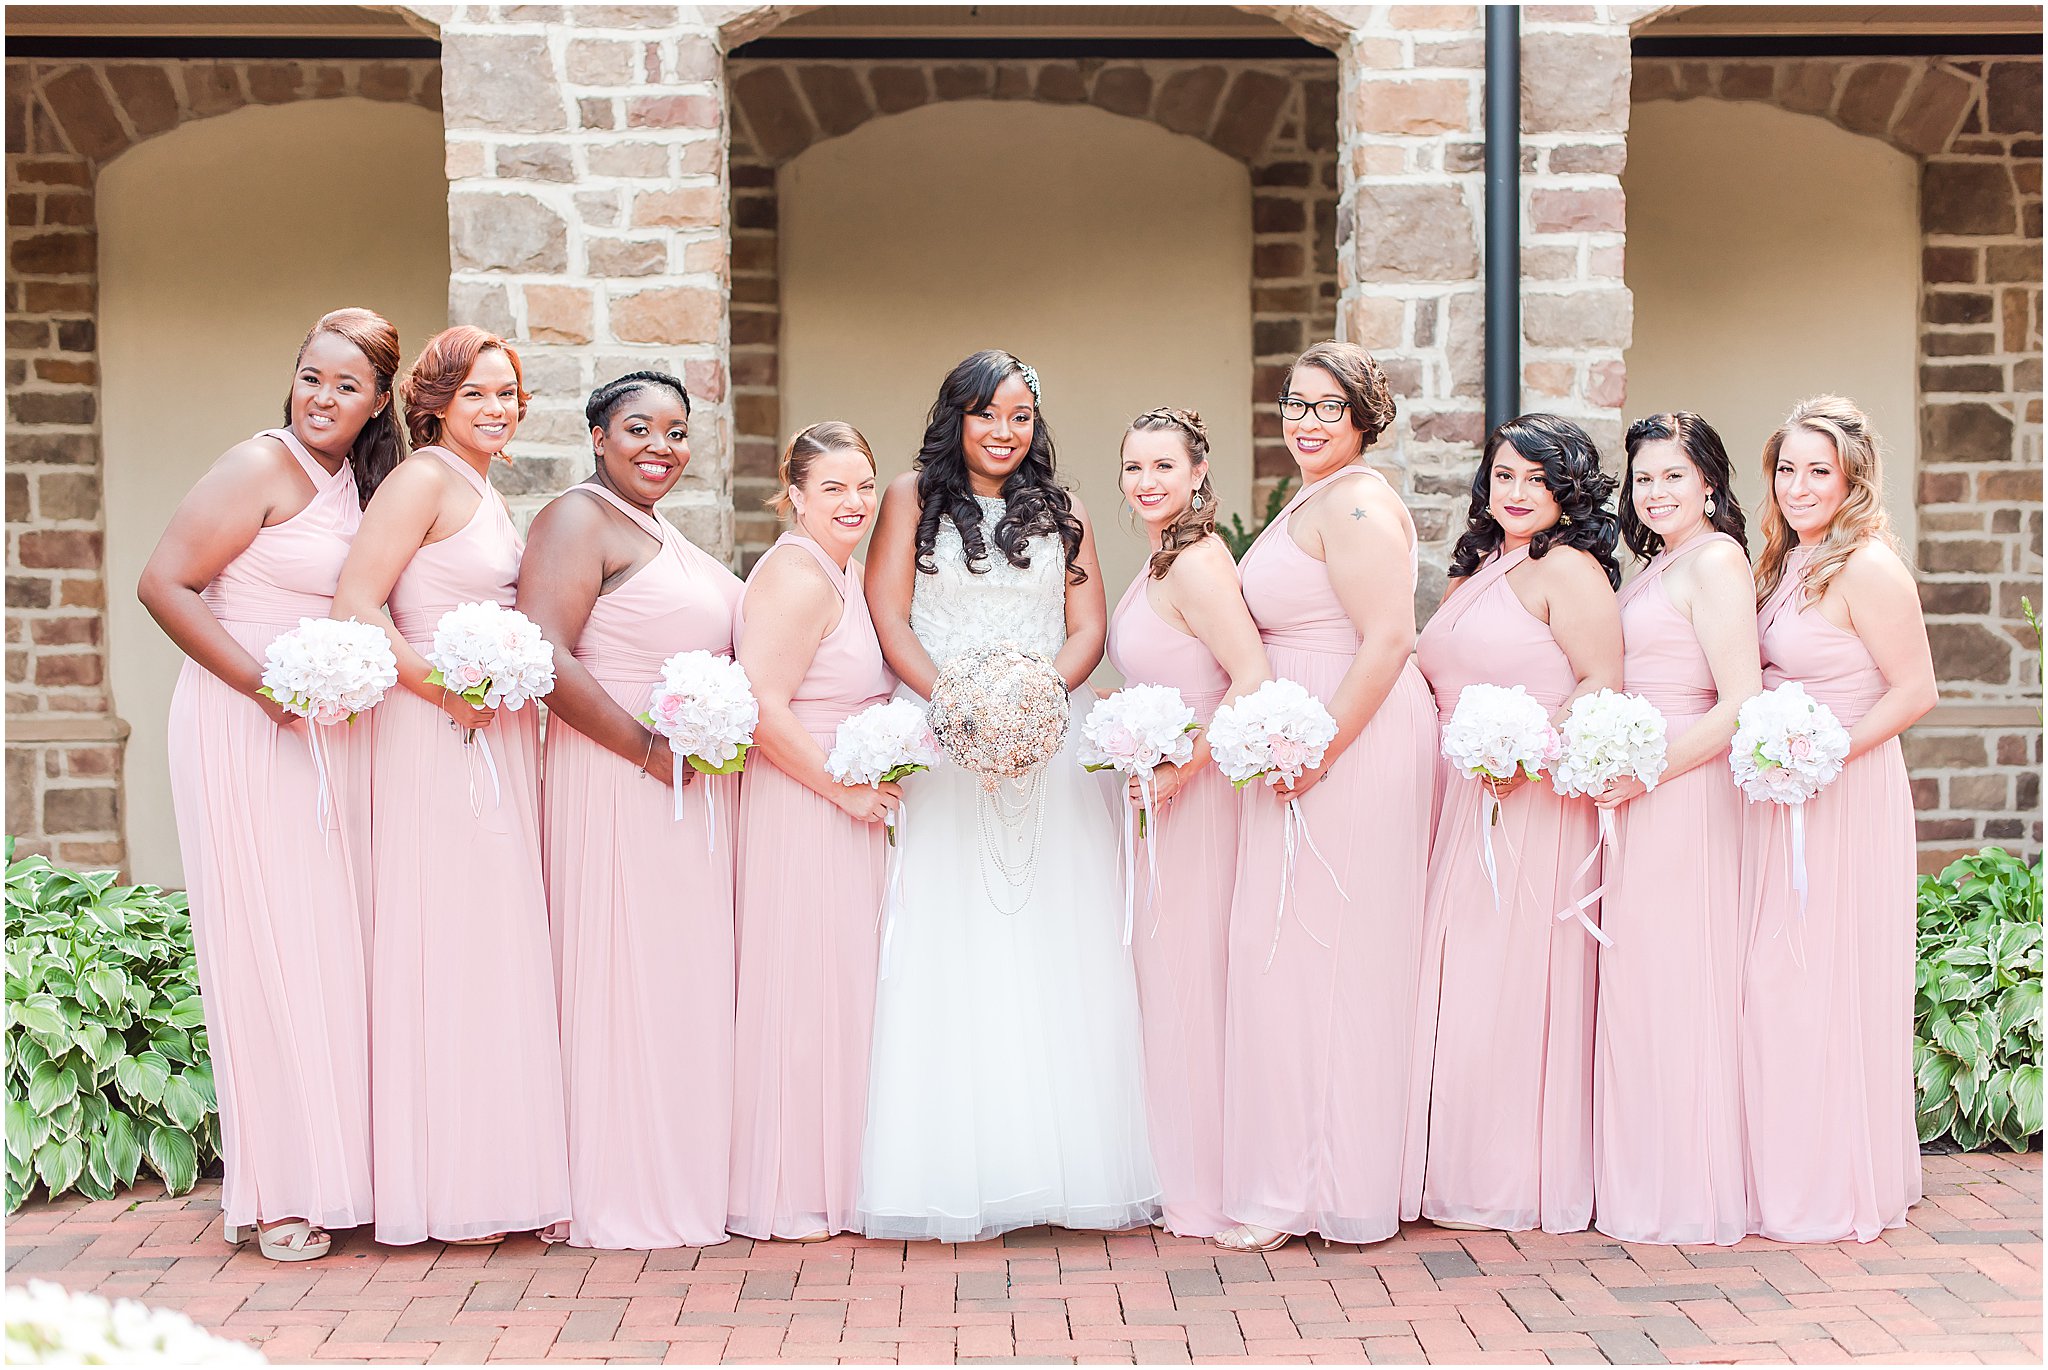 Bridal party portraits at the Pinnacle Golf Club in Grove City, OH | Courtney Carney Photography